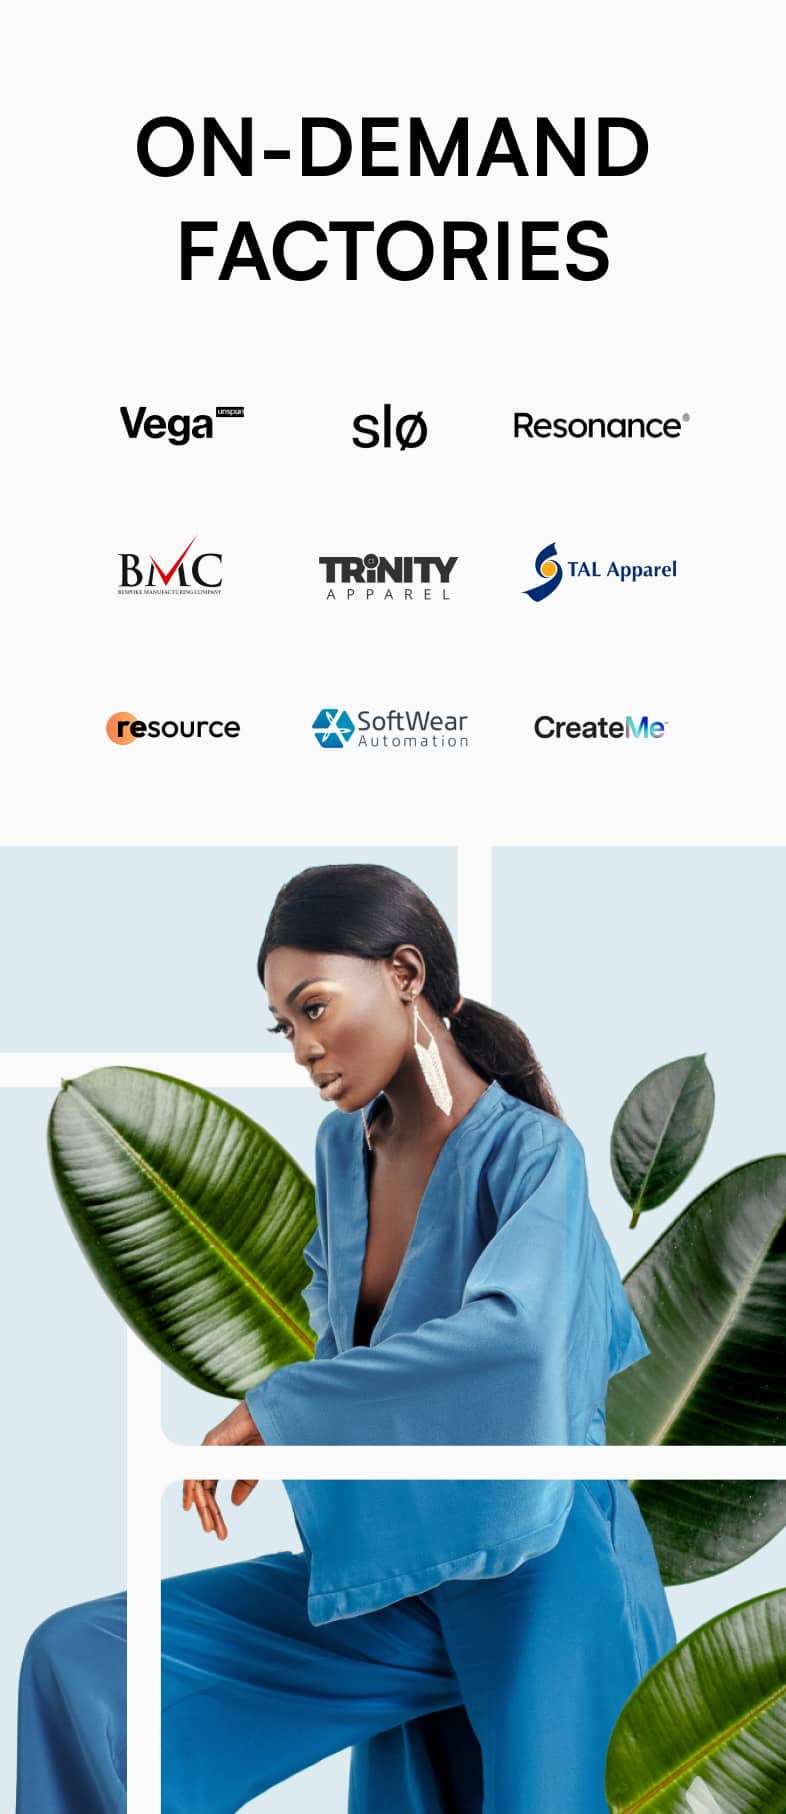 A promotional image featuring a black woman in a blue suit sitting among green leaves, showcasing logos of various tech companies like Vega, Slitio, and others related to the on-demand fashion industry displayed above